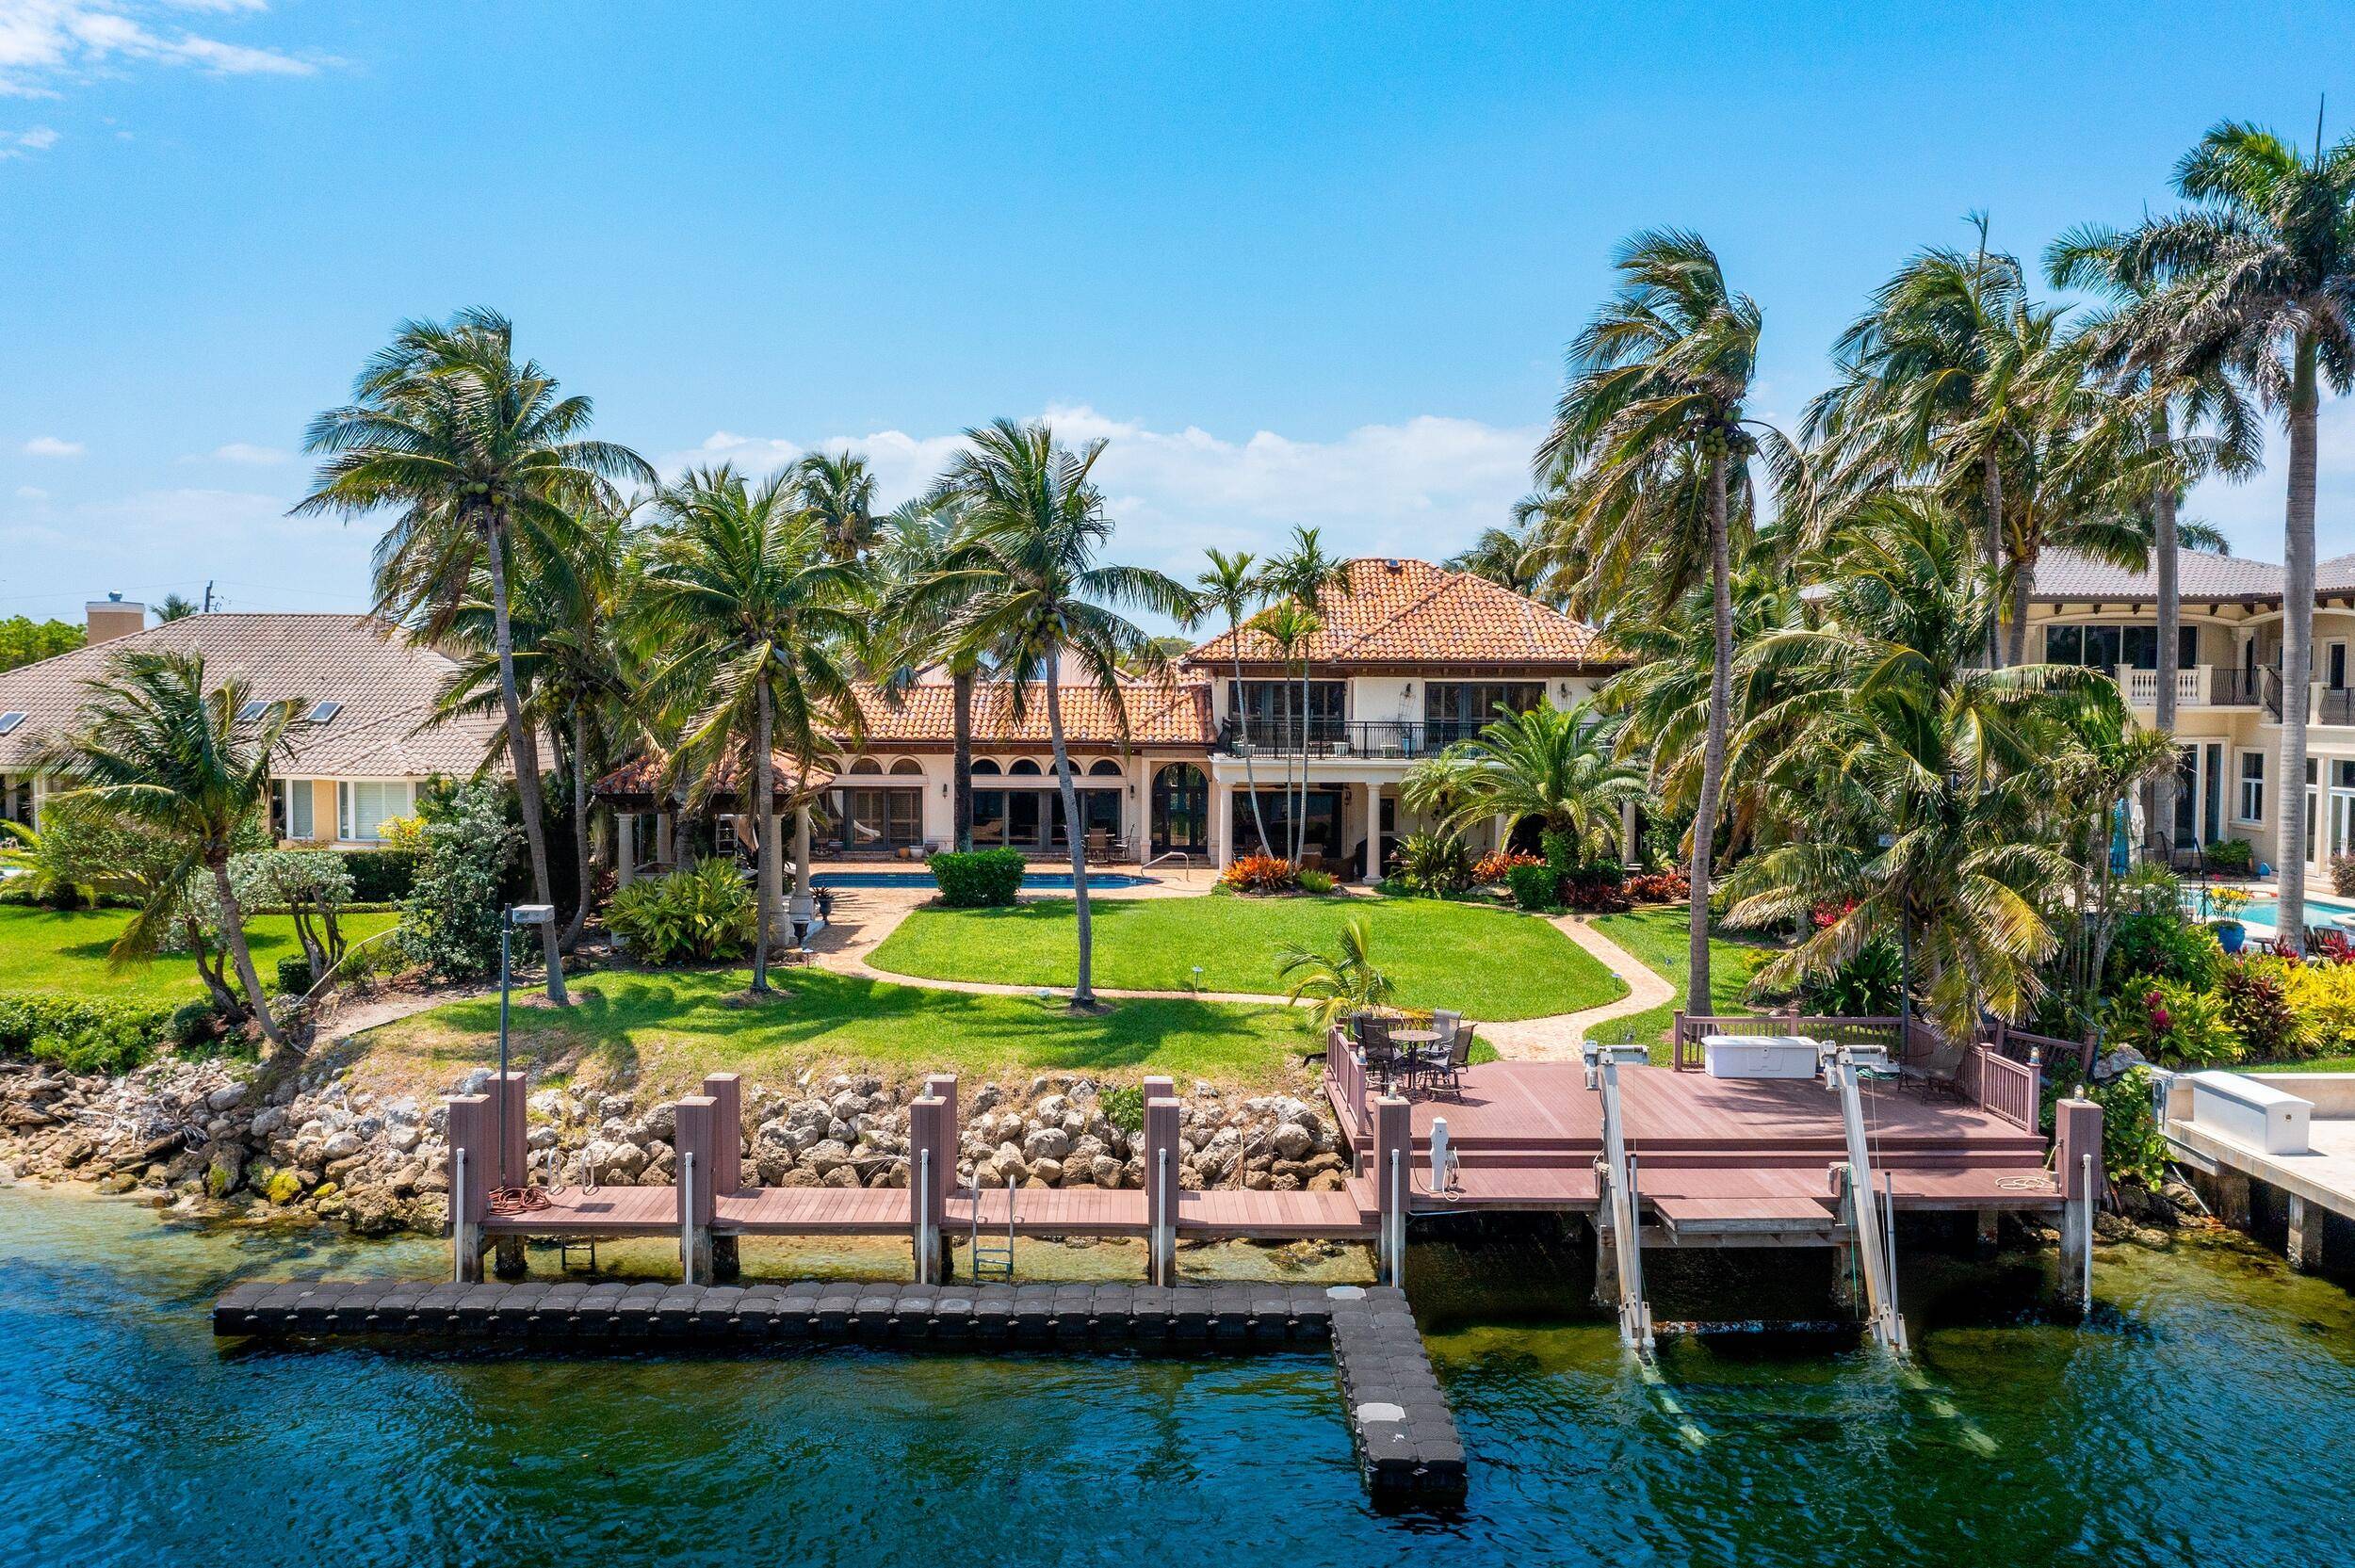 This very classy and comfortably spacious Mediterranean house is a must see home for anyone looking for a large home with the ultimate lot, directly on the Intracoastal.